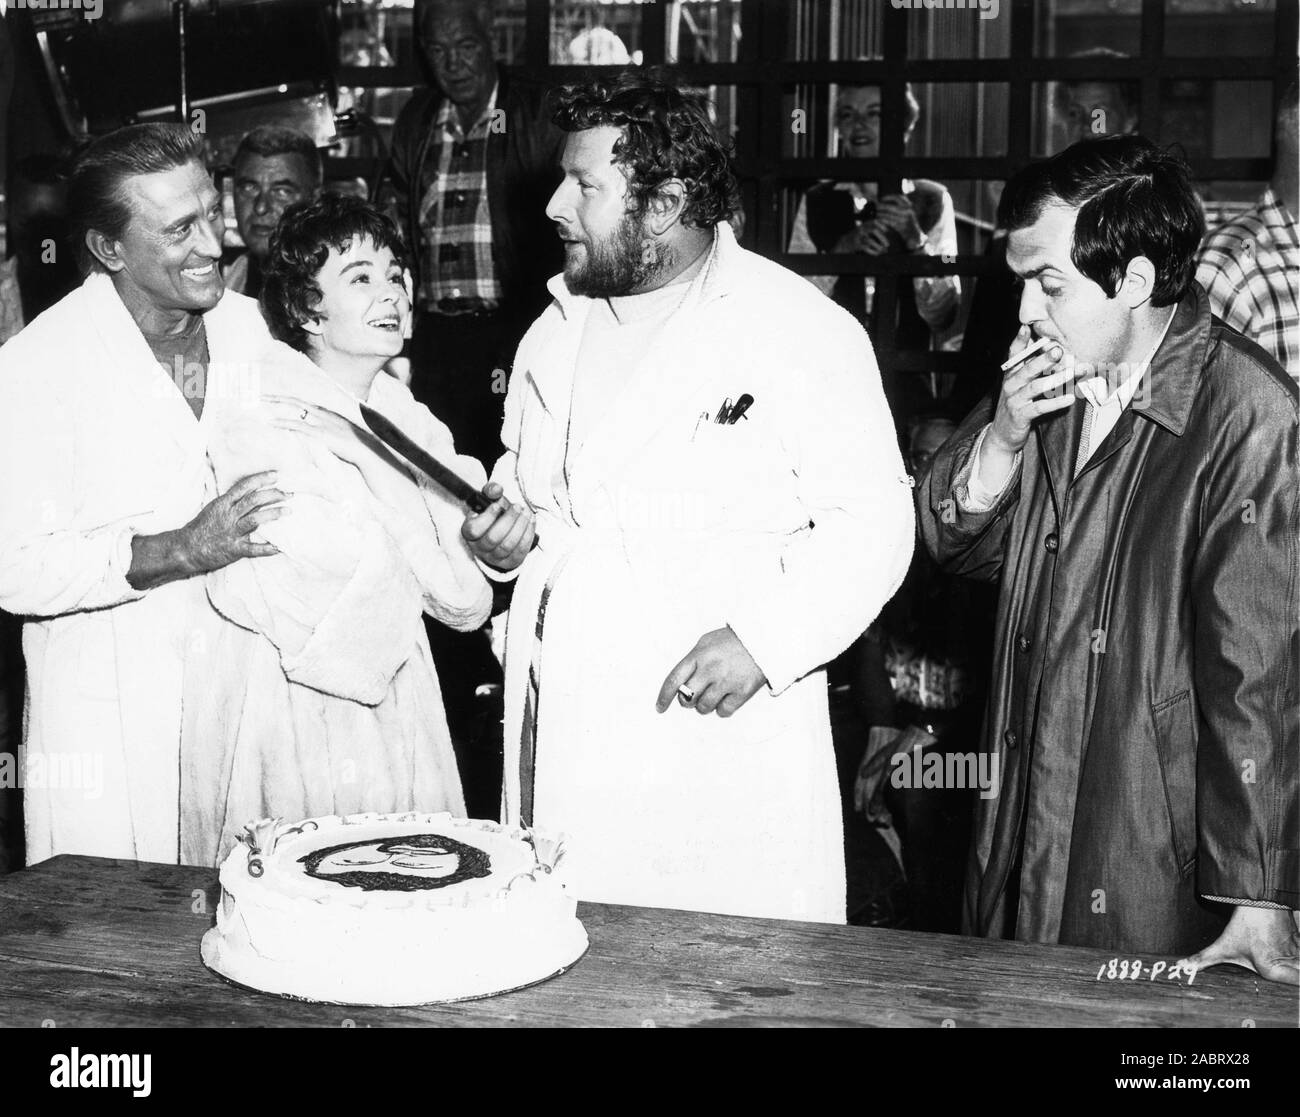 KIRK DOUGLAS JEAN SIMMONS and Director STANLEY KUBRICK watch PETER USTINOV cut his surprise birthday cake on set candid during filming of SPARTACUS 1960 novel Howard Fast screenplay Dalton Trumbo executive producer Kirk Douglas Bryna Productions / Universal Pictures Stock Photo